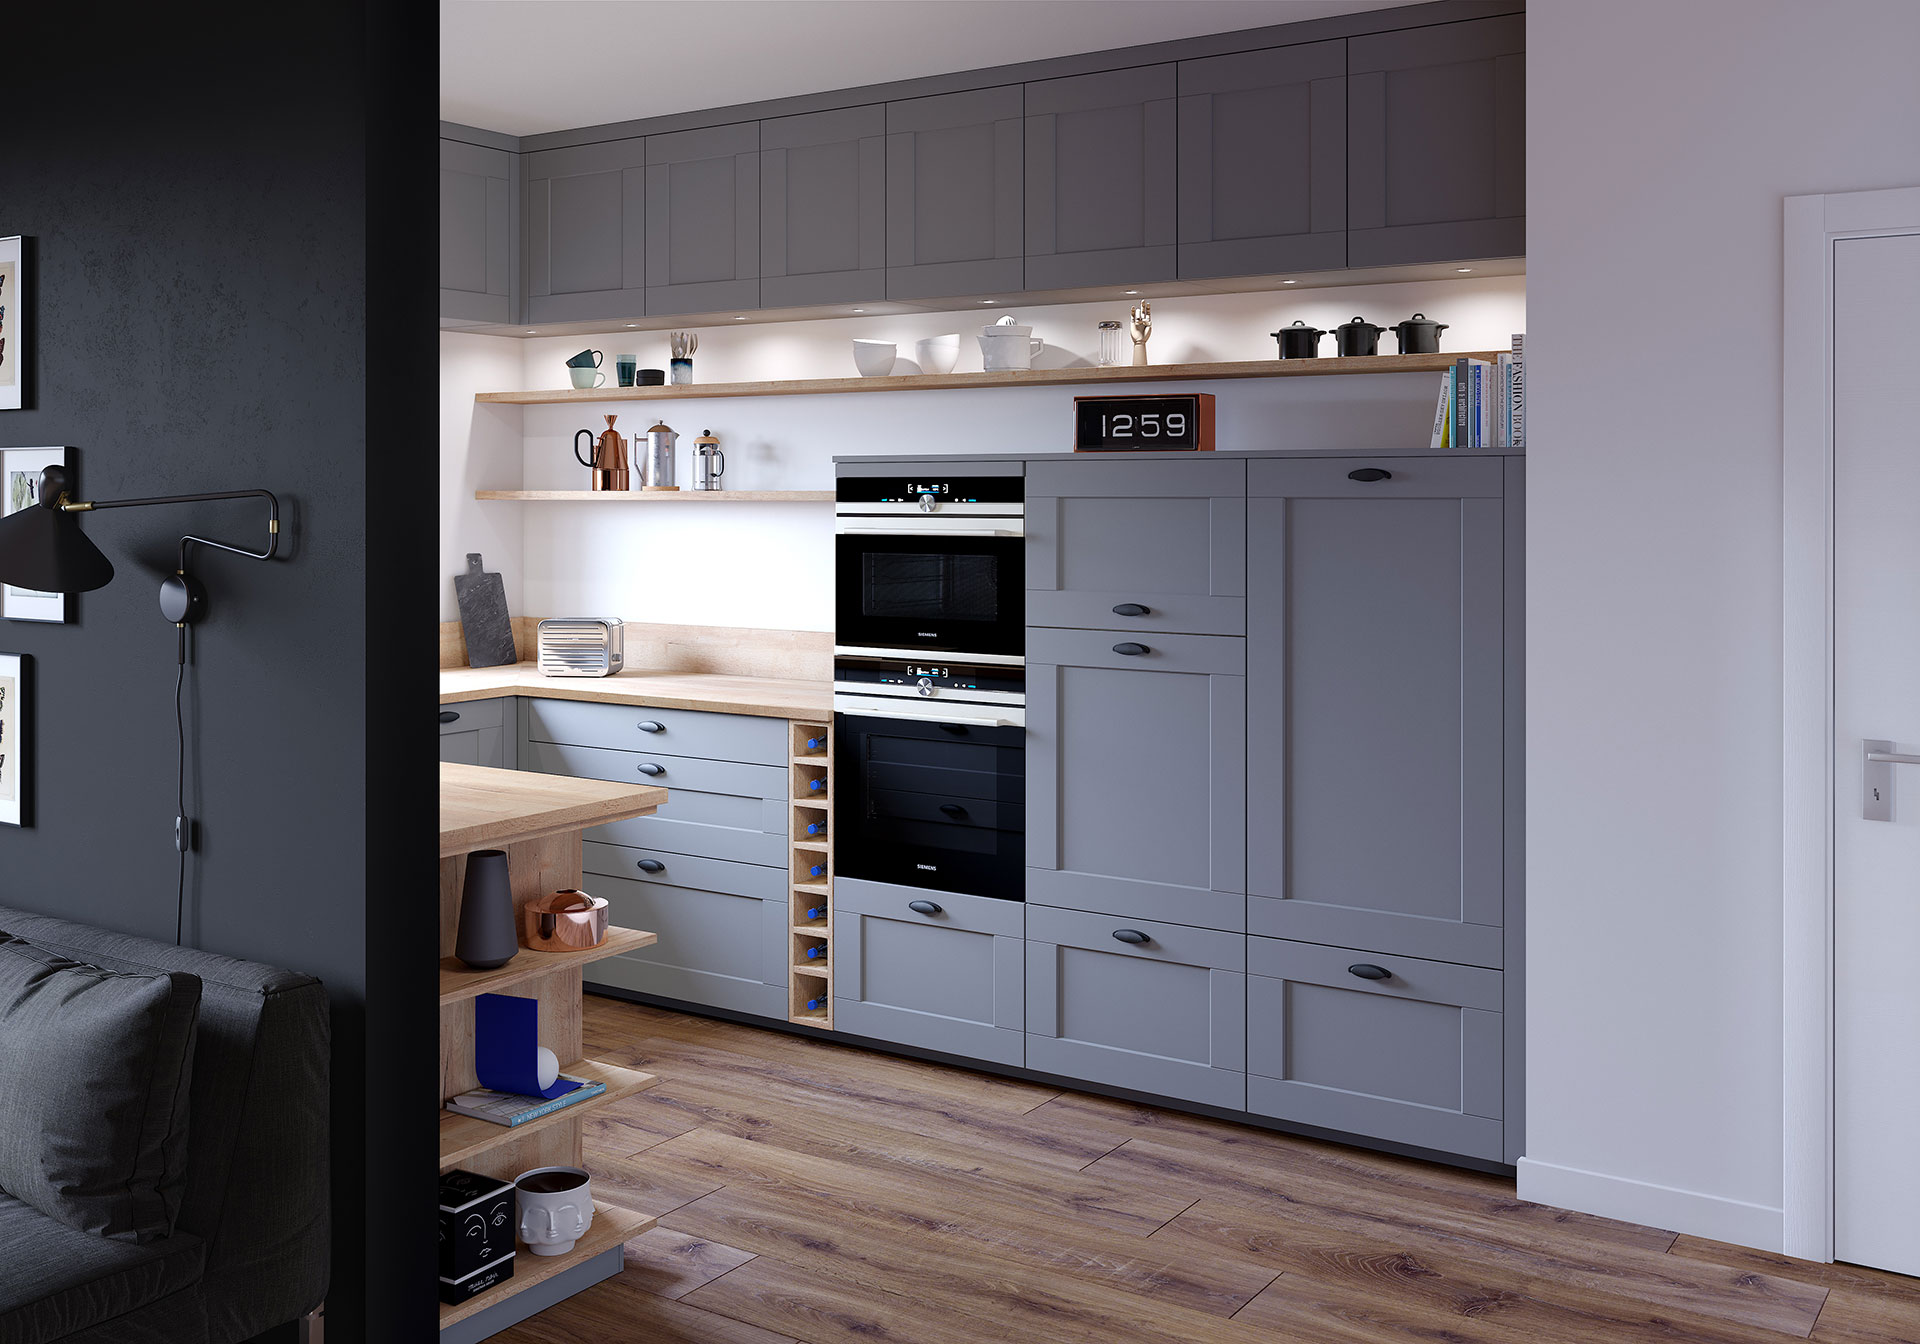 Ad project - 3D visualization of kitchen furniture